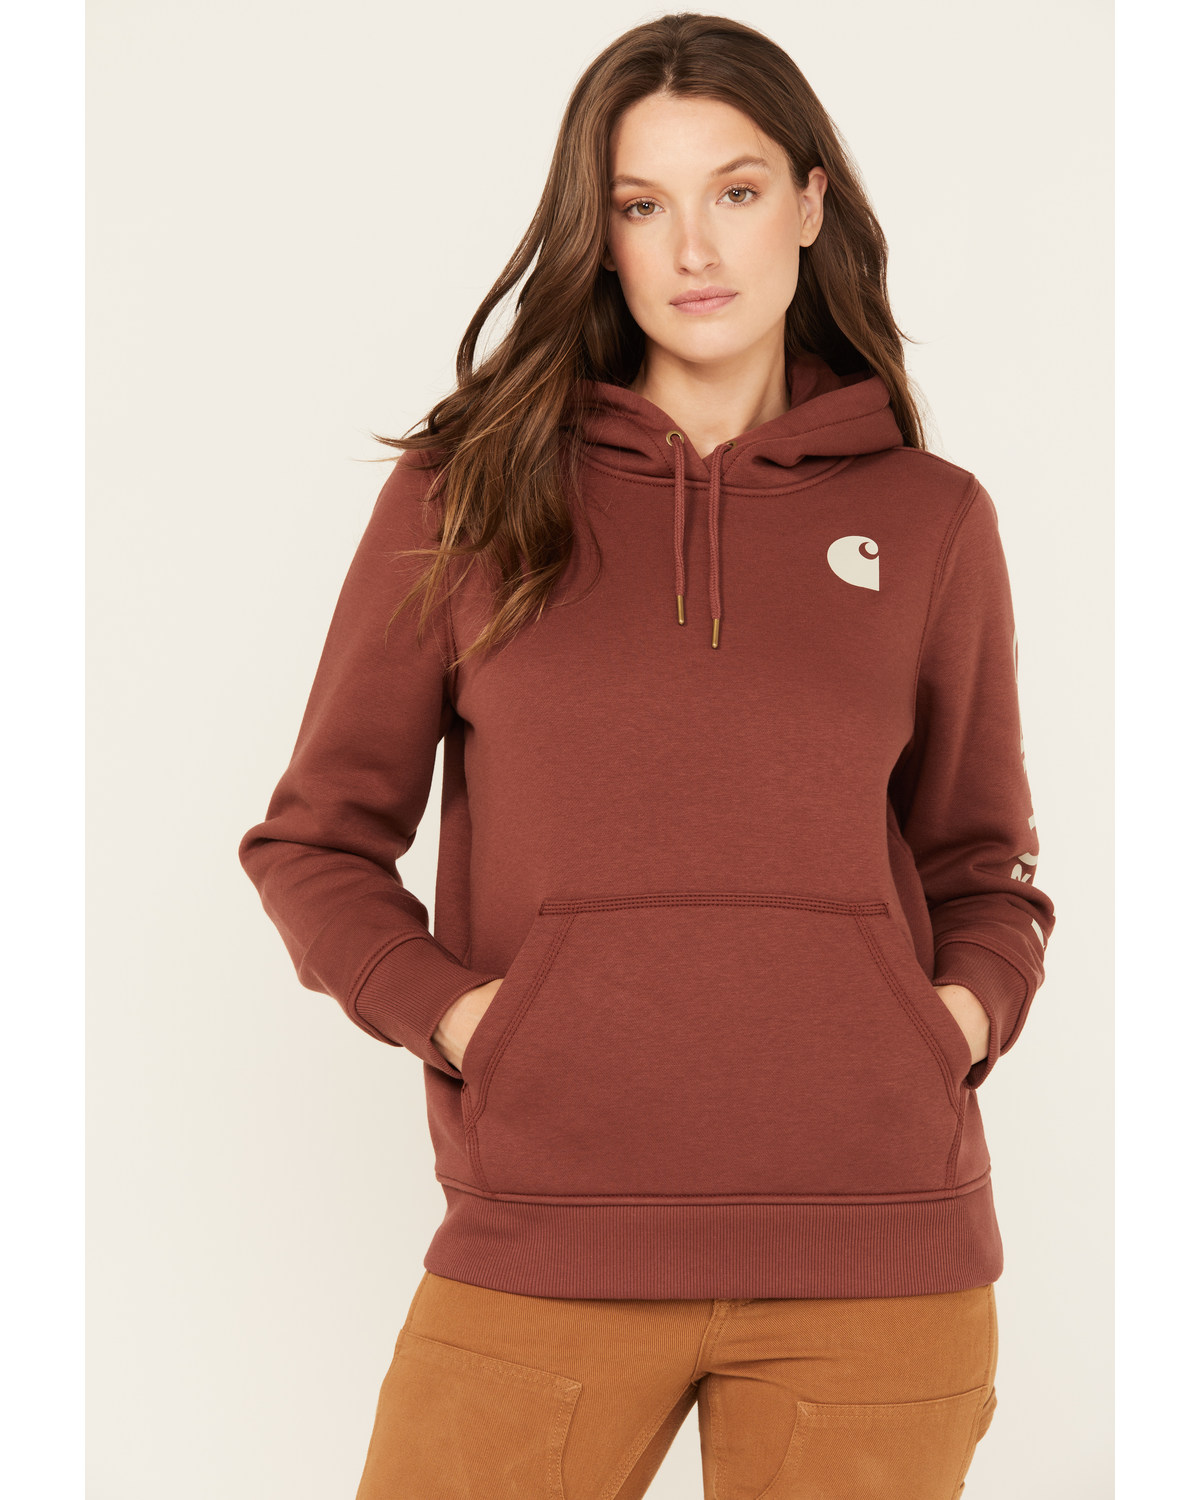 Carhartt Women's Relaxed Fit Midweight Graphic Hoodie